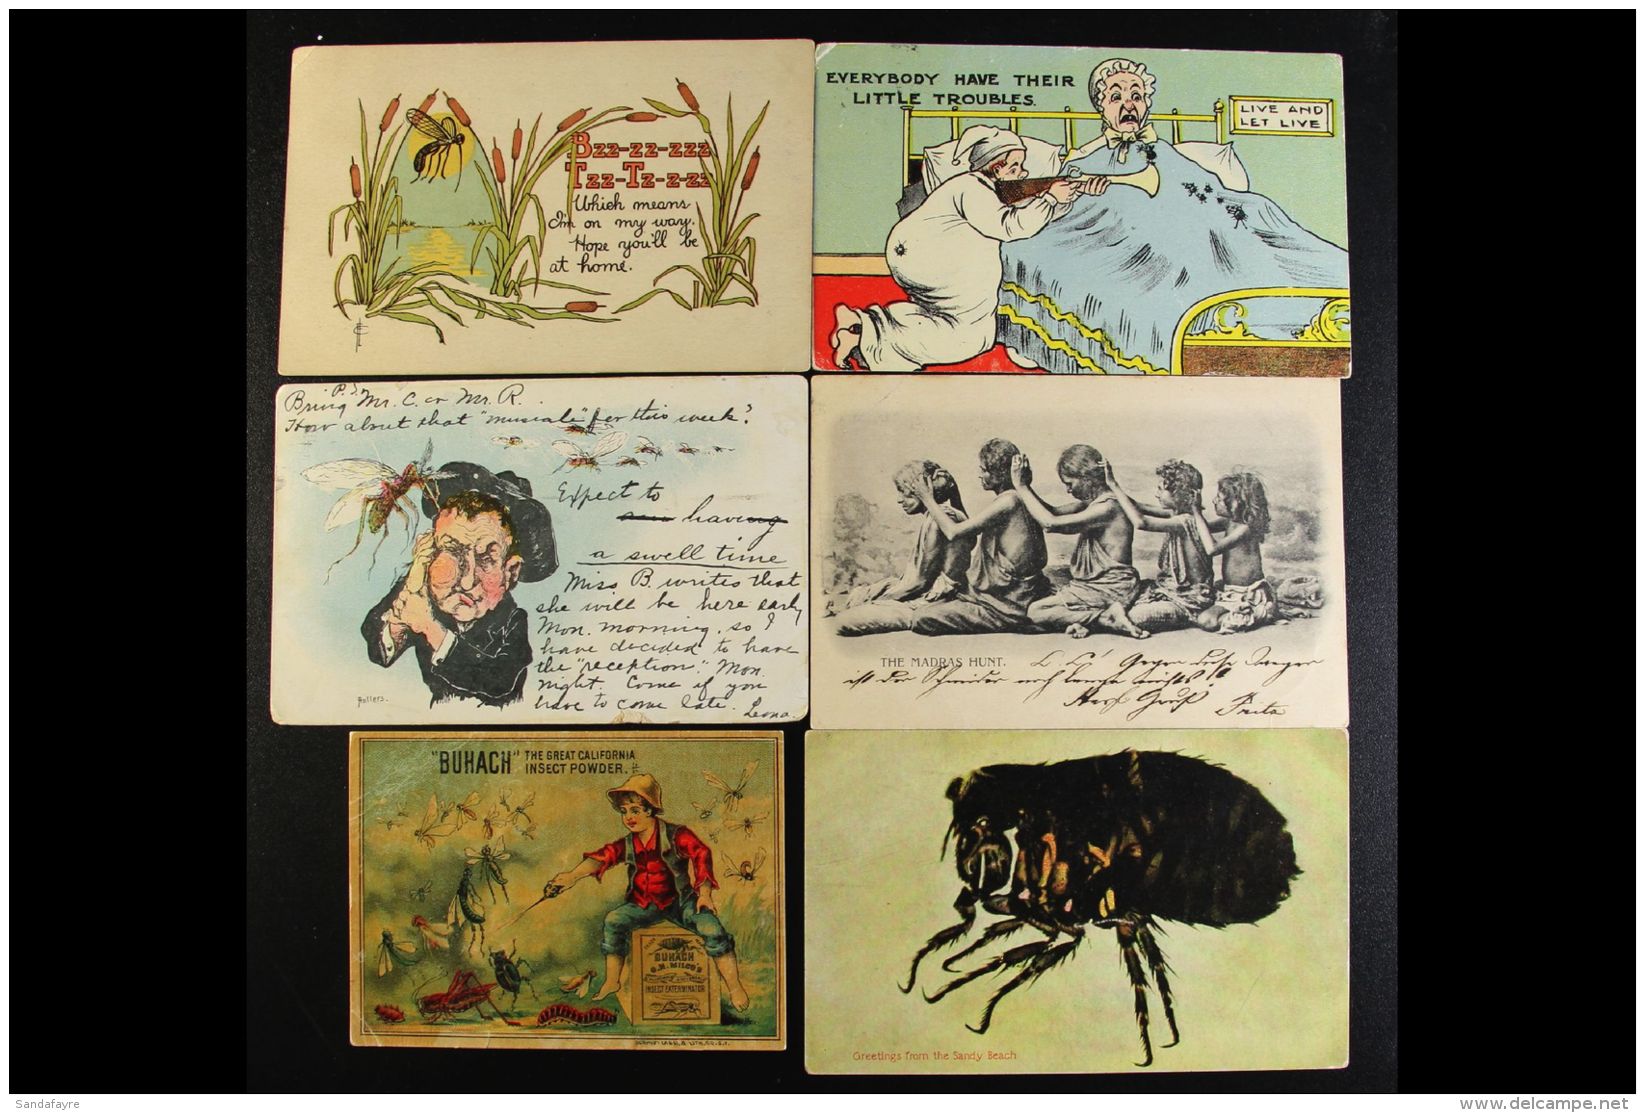 INSECTS An All Periods Worldwide Thematic Collection Of Postcards And Postal Stationery Ranging From Early 1900's... - Zonder Classificatie